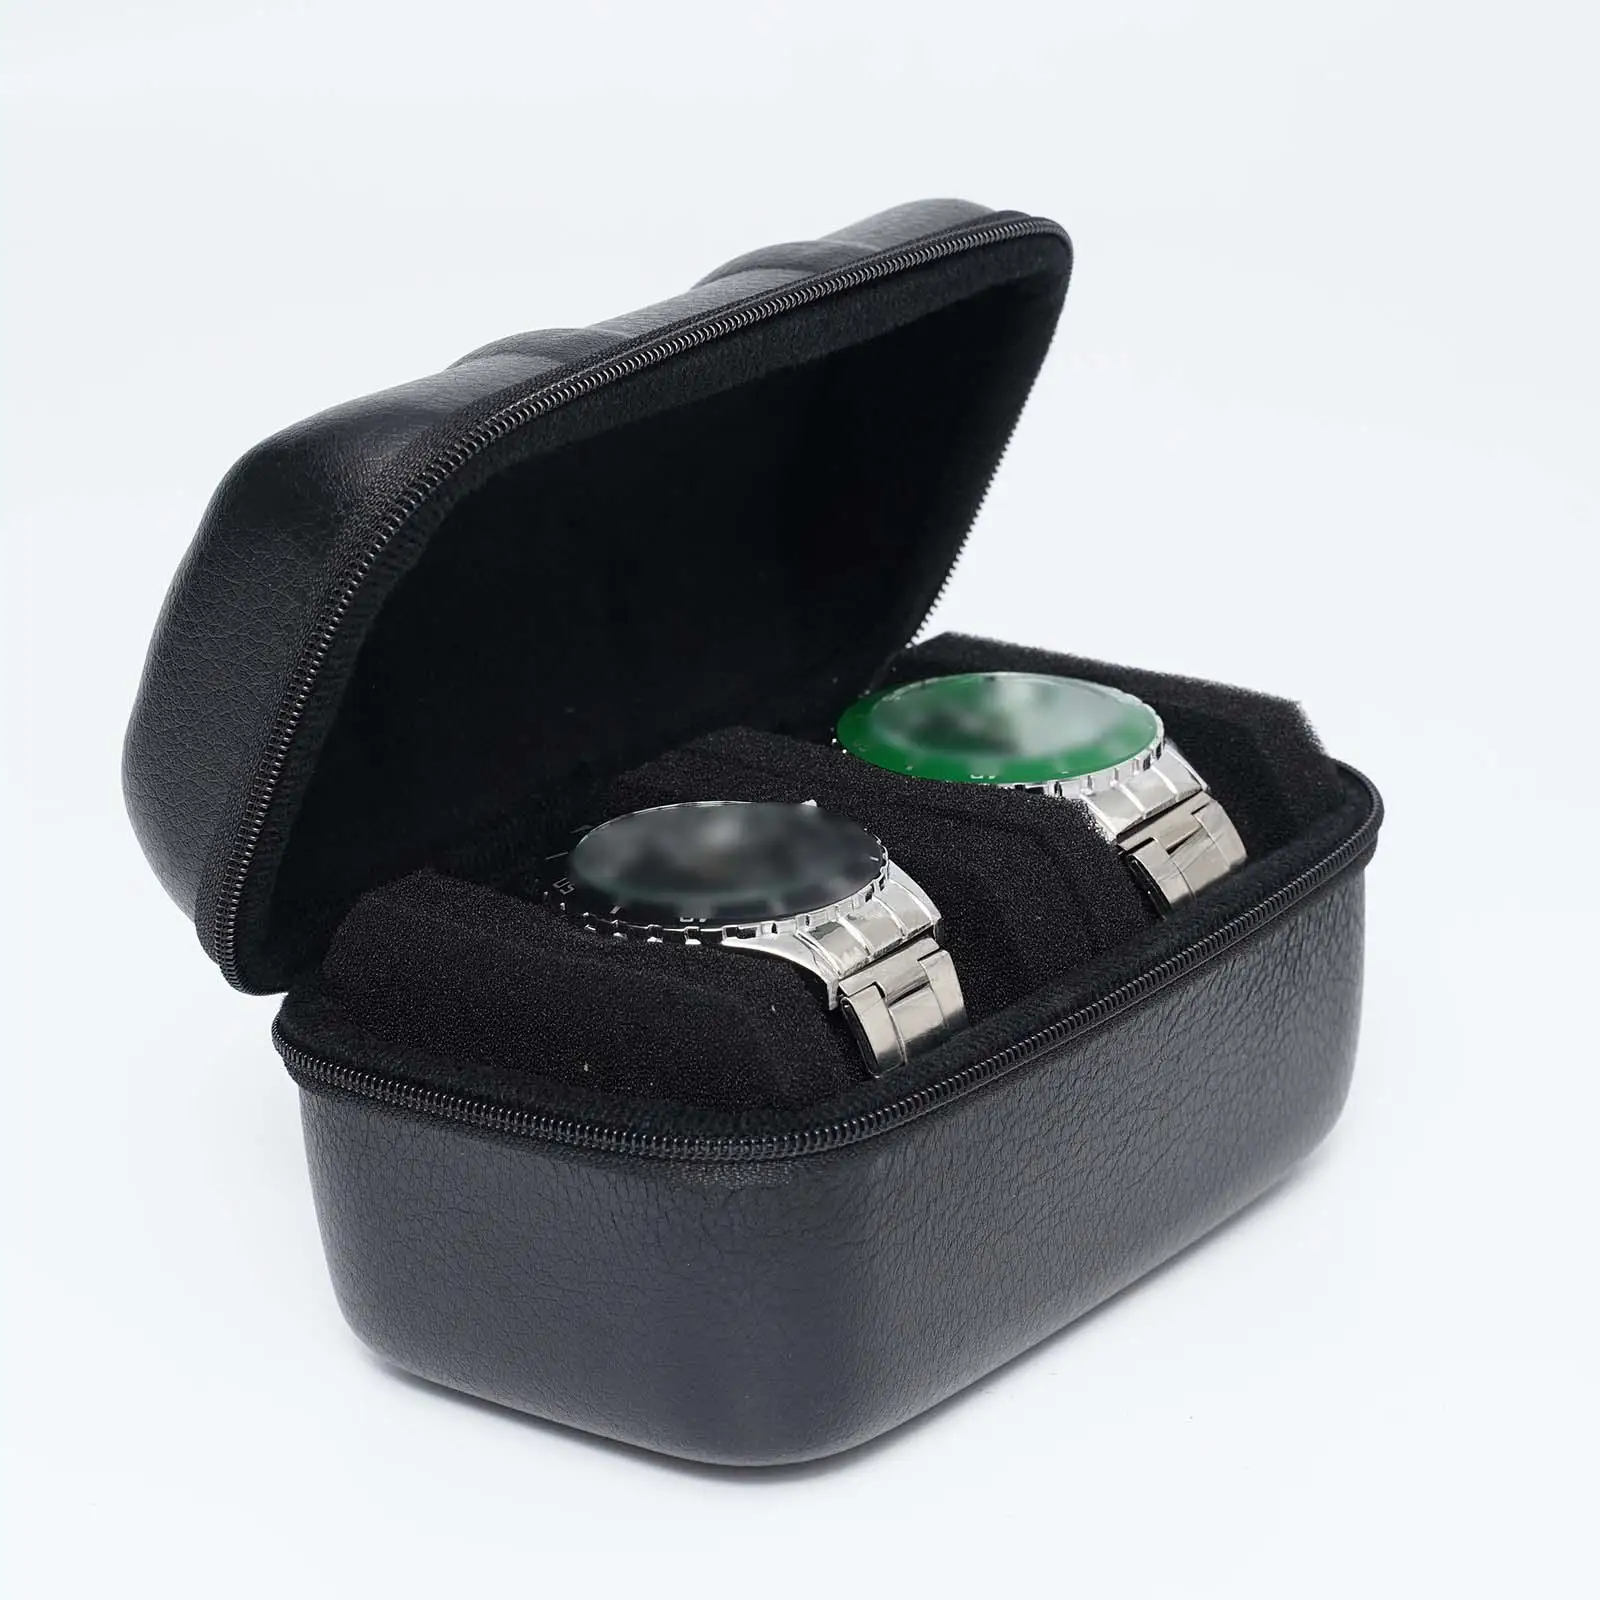 2 Slots Watch Roll Travel Case, Watch Holder Keep Watch from Moving Compact Jewelry Storage with Watch  Organizer for Home